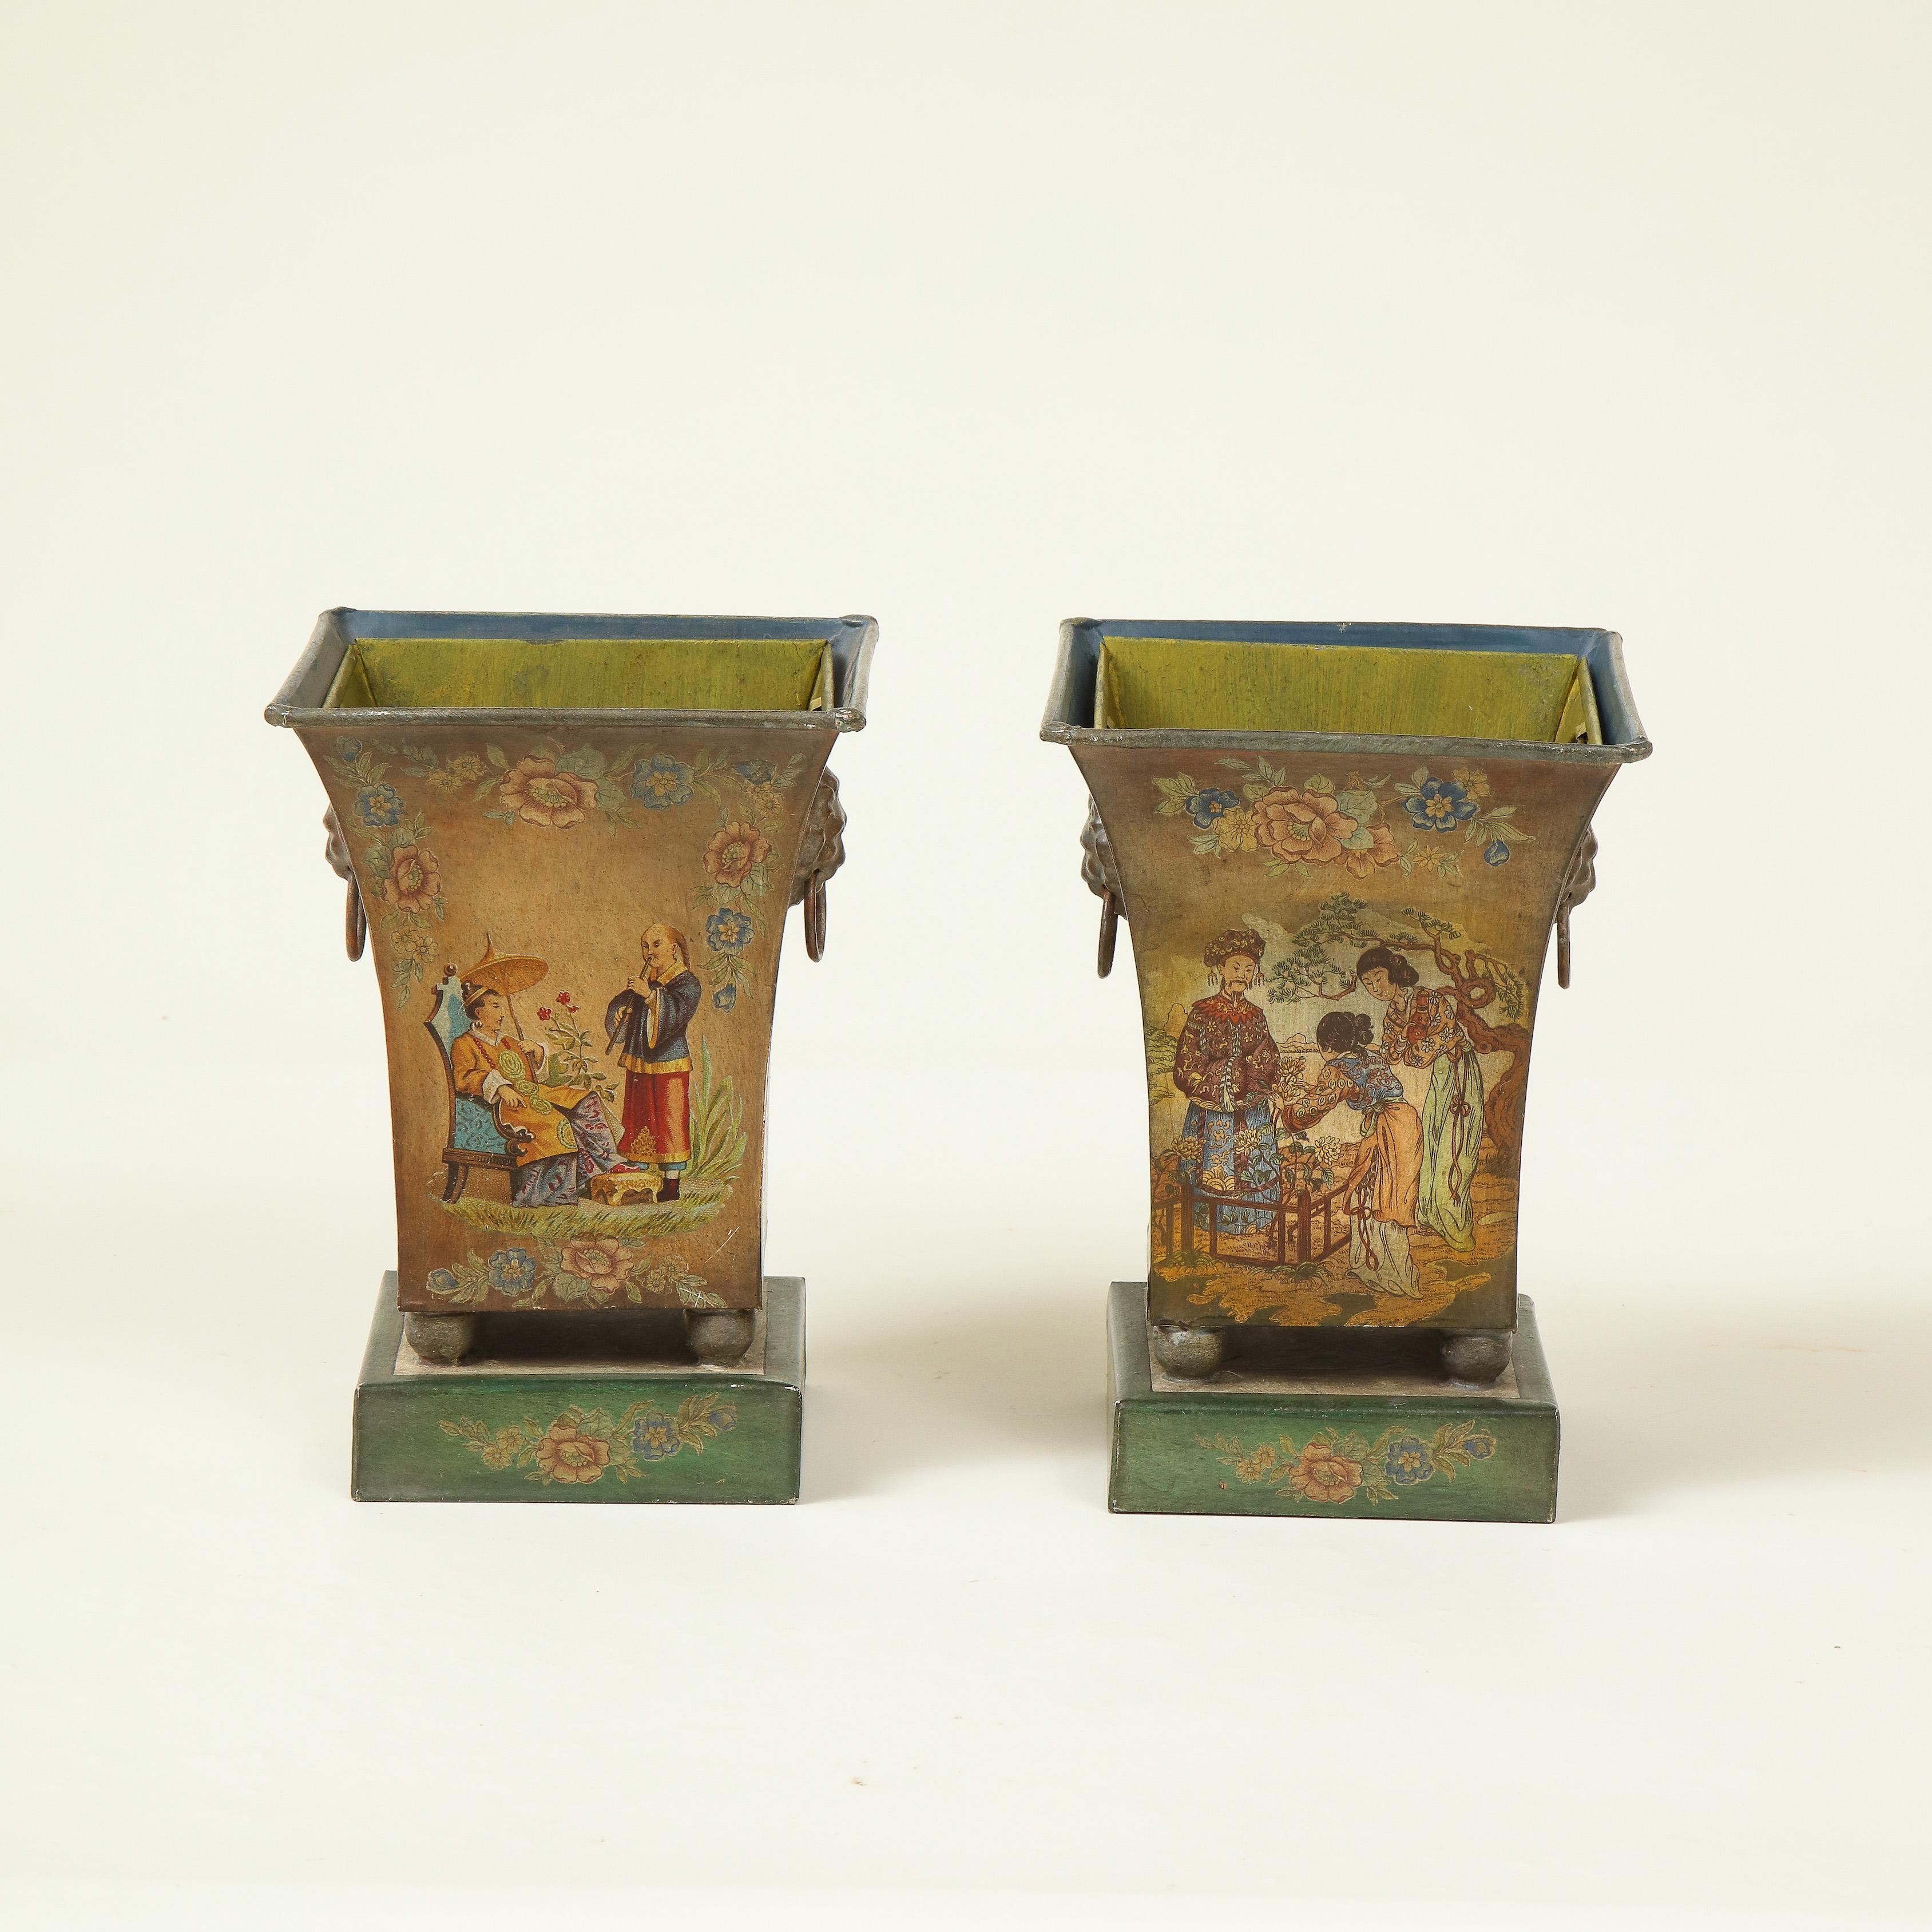 Each of square tapering form, with lion mask ring handles to the sides, on ball feet and a green square plinth base, decorated with Chinese figures in a garden setting and floral garden on an amber ground, with removable liners, signed